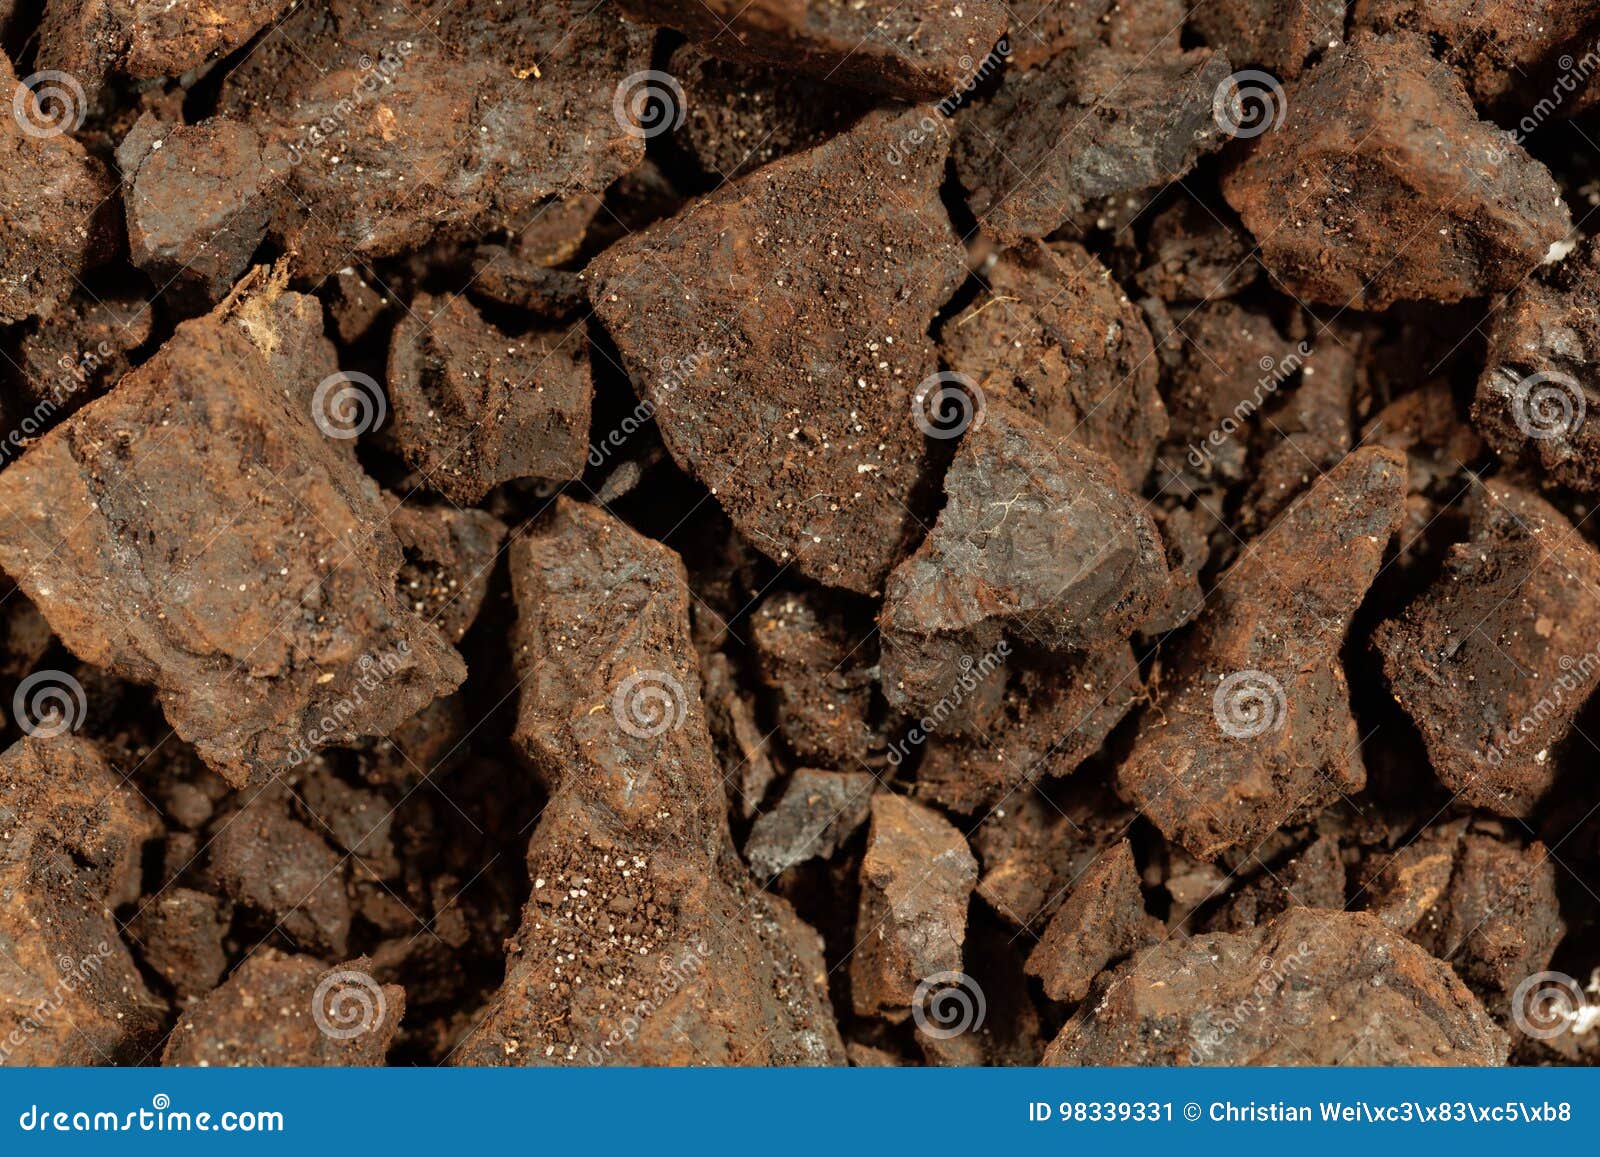 Pieces of Lignite or Brown Coal Stock Image - Image of brown